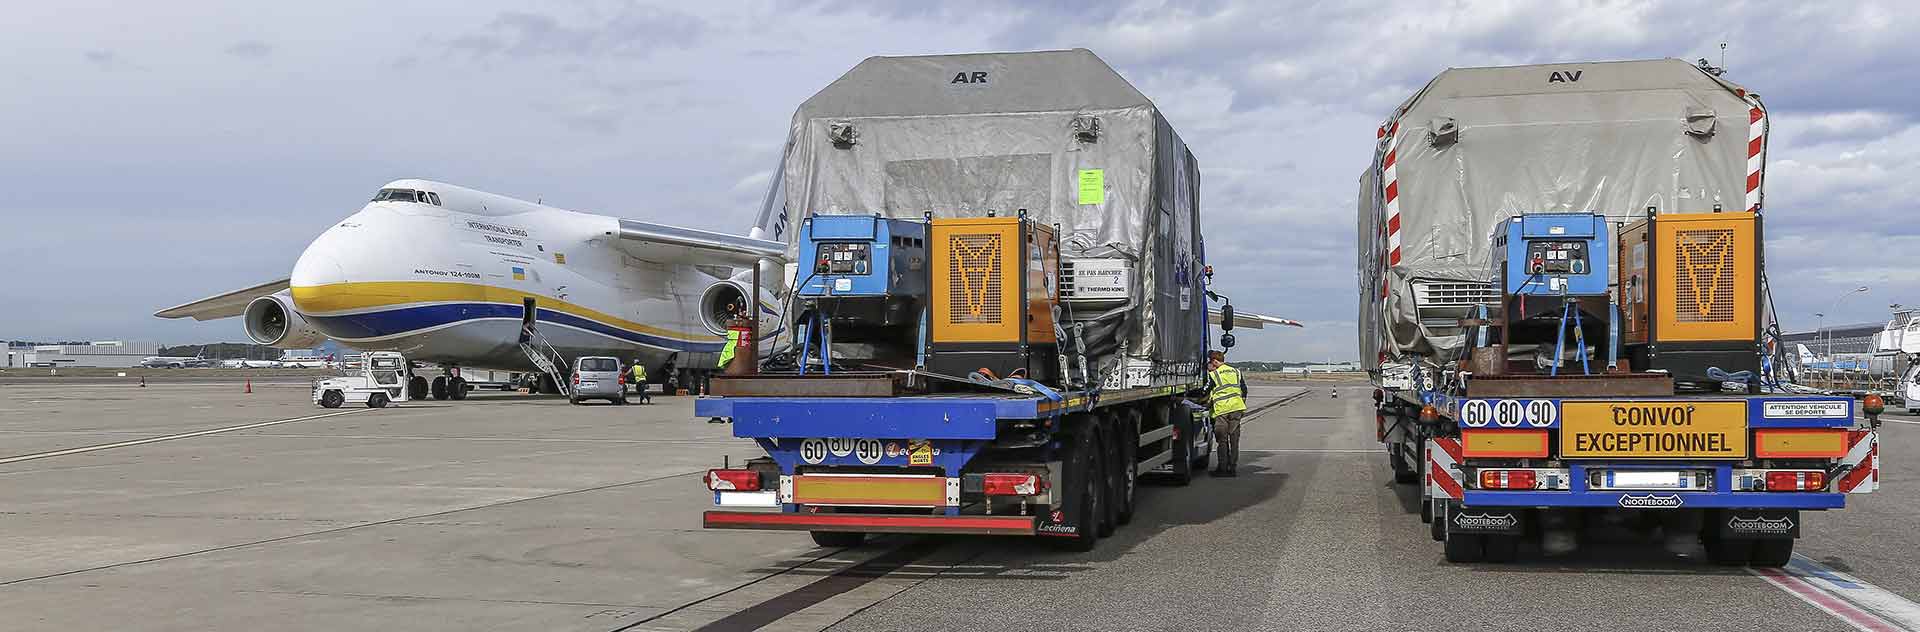 The last batch of the Airbus-built, owned and operated Pléiades Neo satellites has arrived at the European Space Center in Kourou, French Guiana